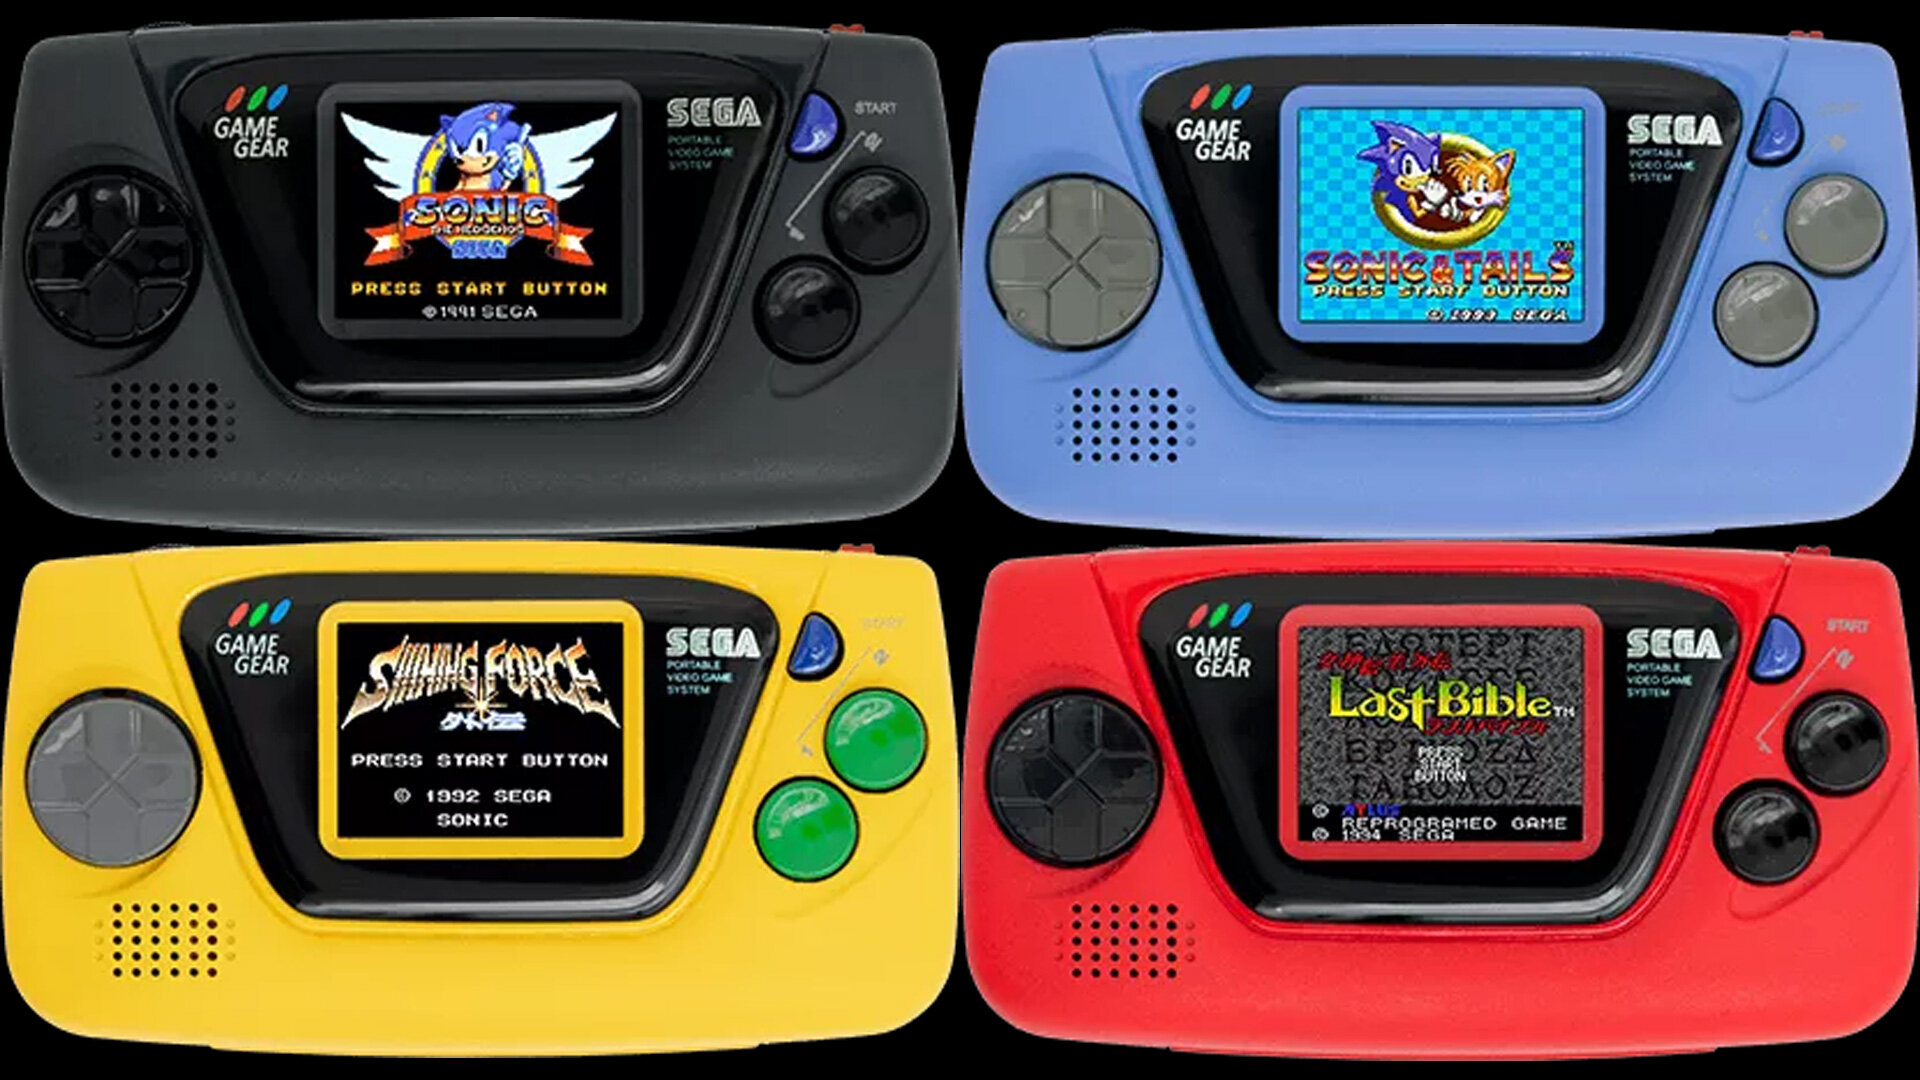 Sega takes another dive into nostalgia with the Game Gear Micro